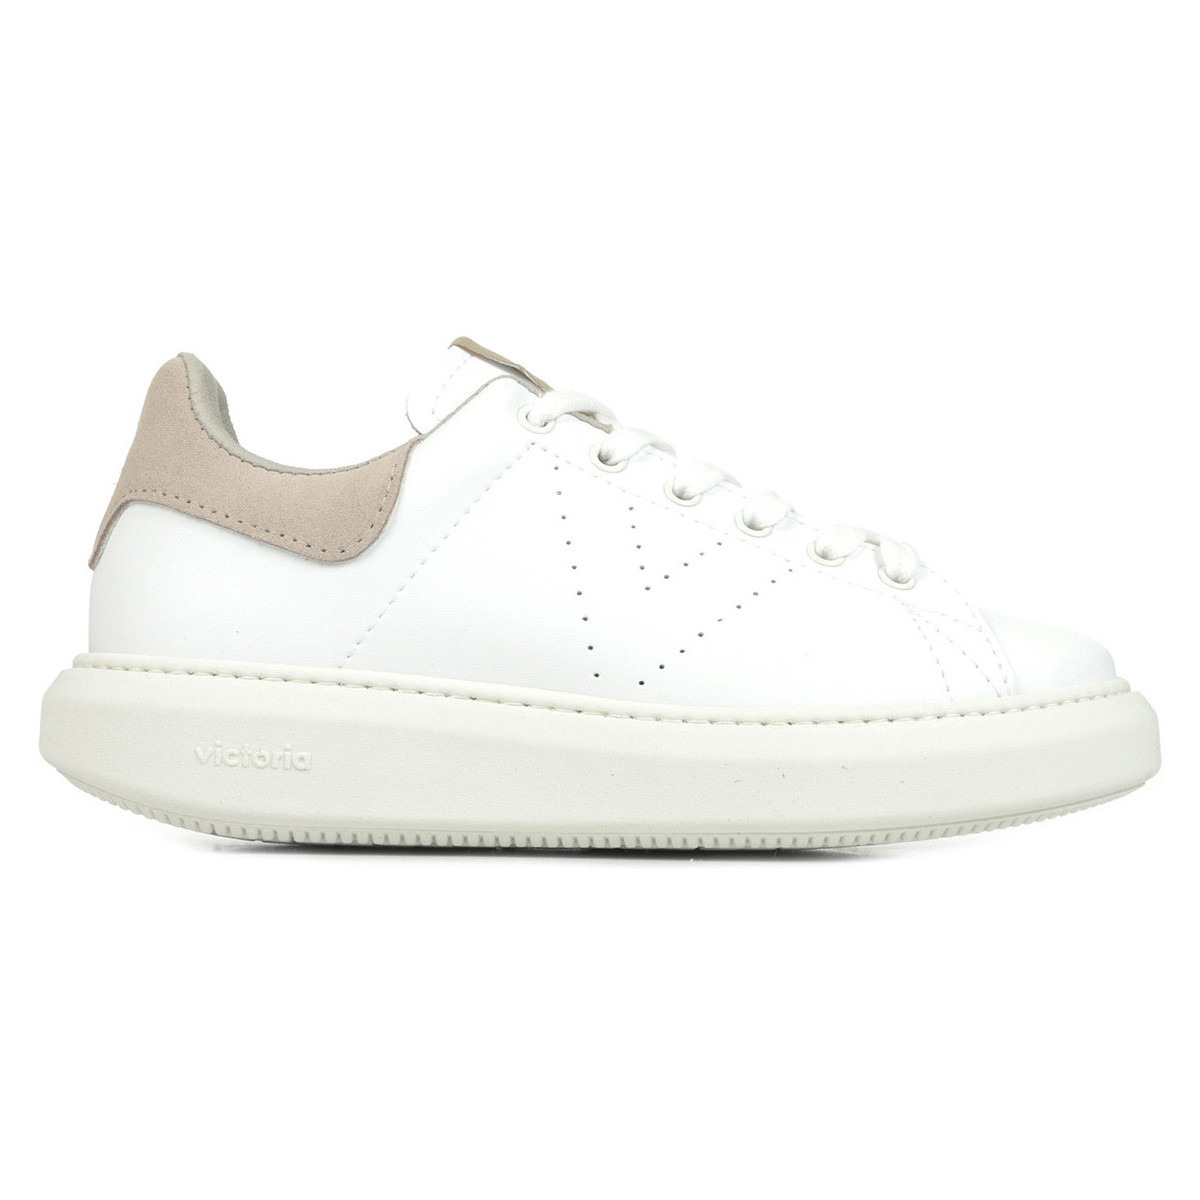 Victoria Lady Sneakers in White by Spartoo GOOFASH